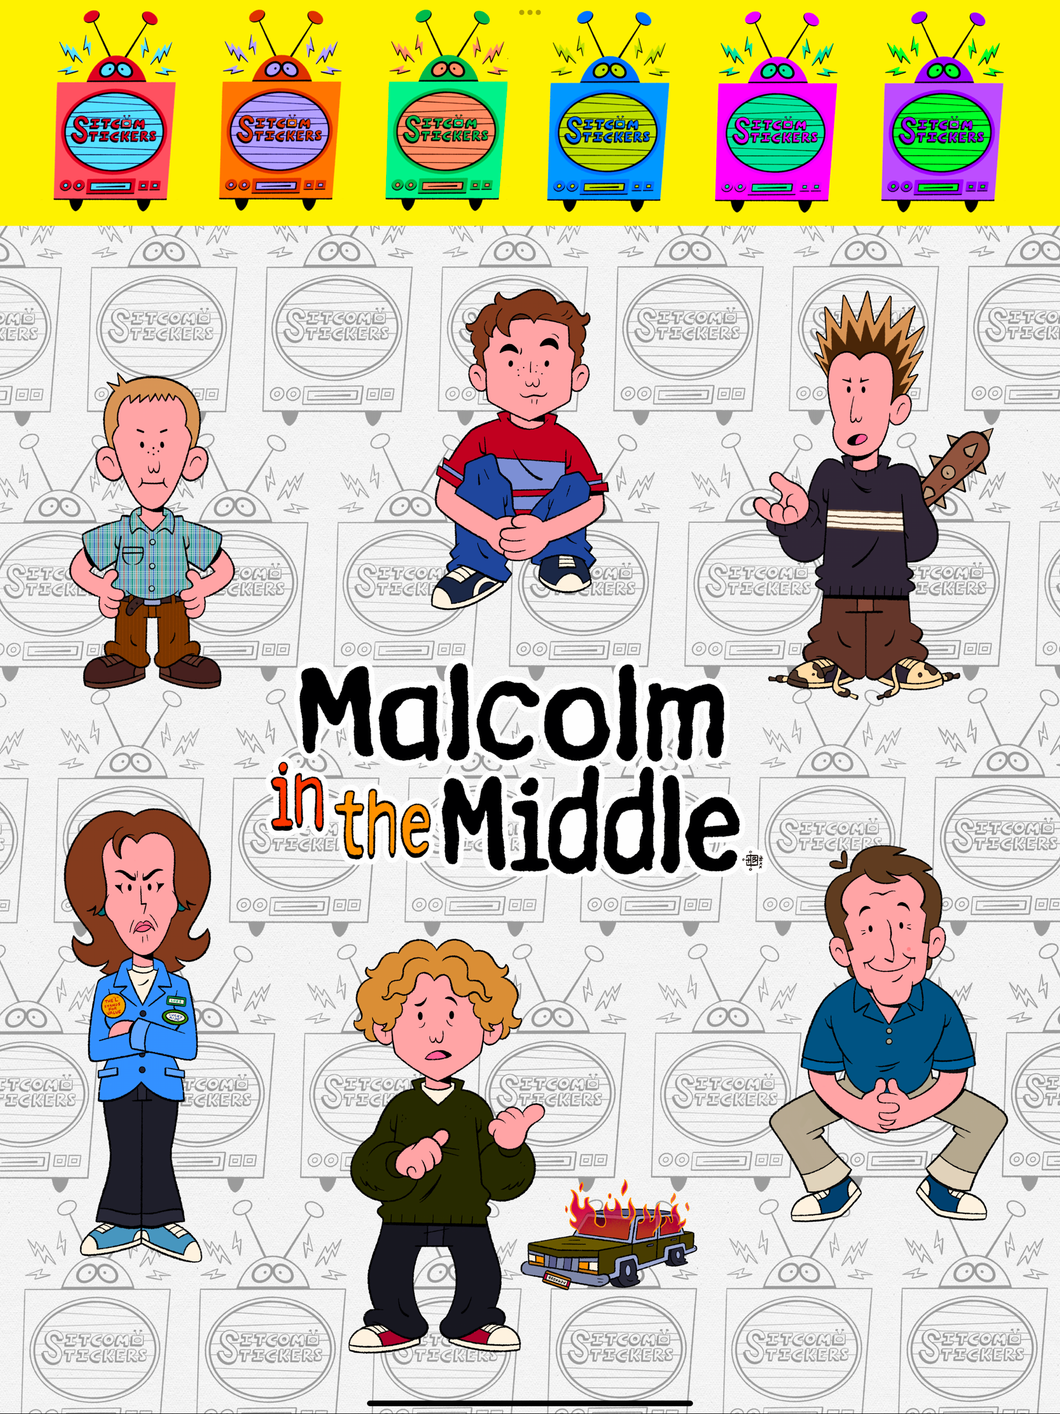 Malcolm in the Middle- Sitcom Stickers